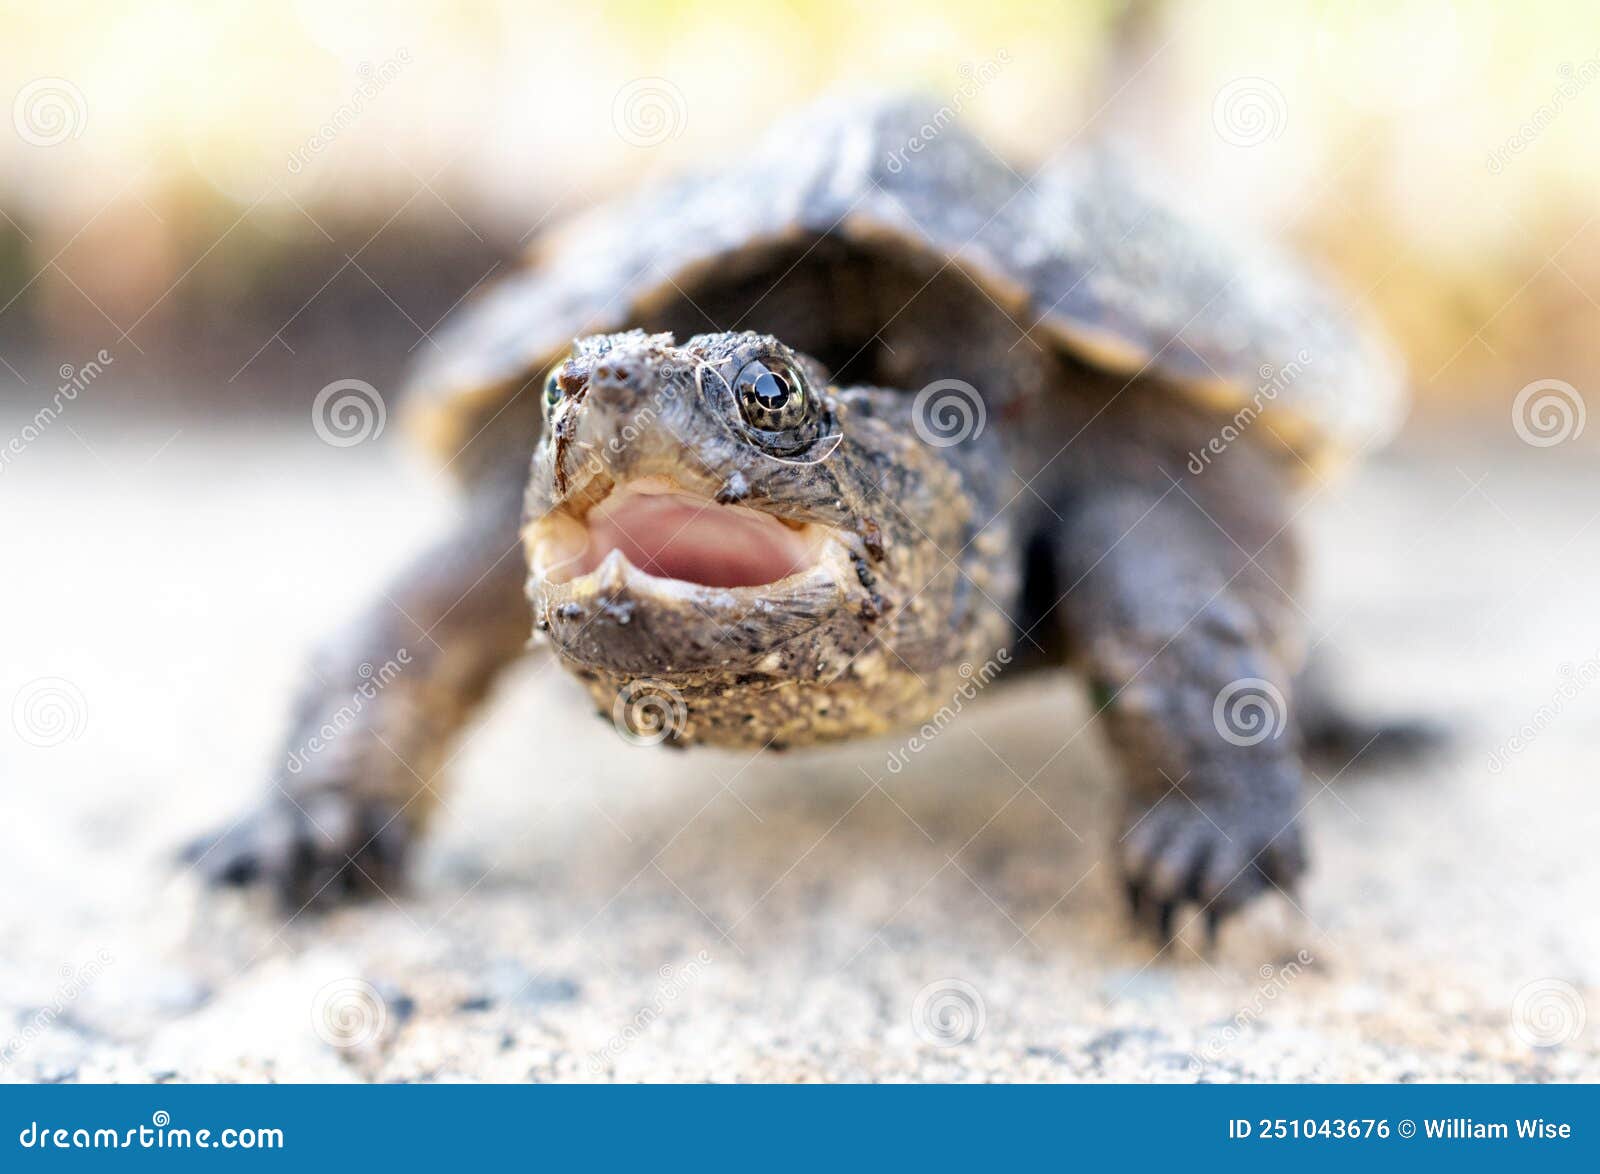 baby snapping turtle bite